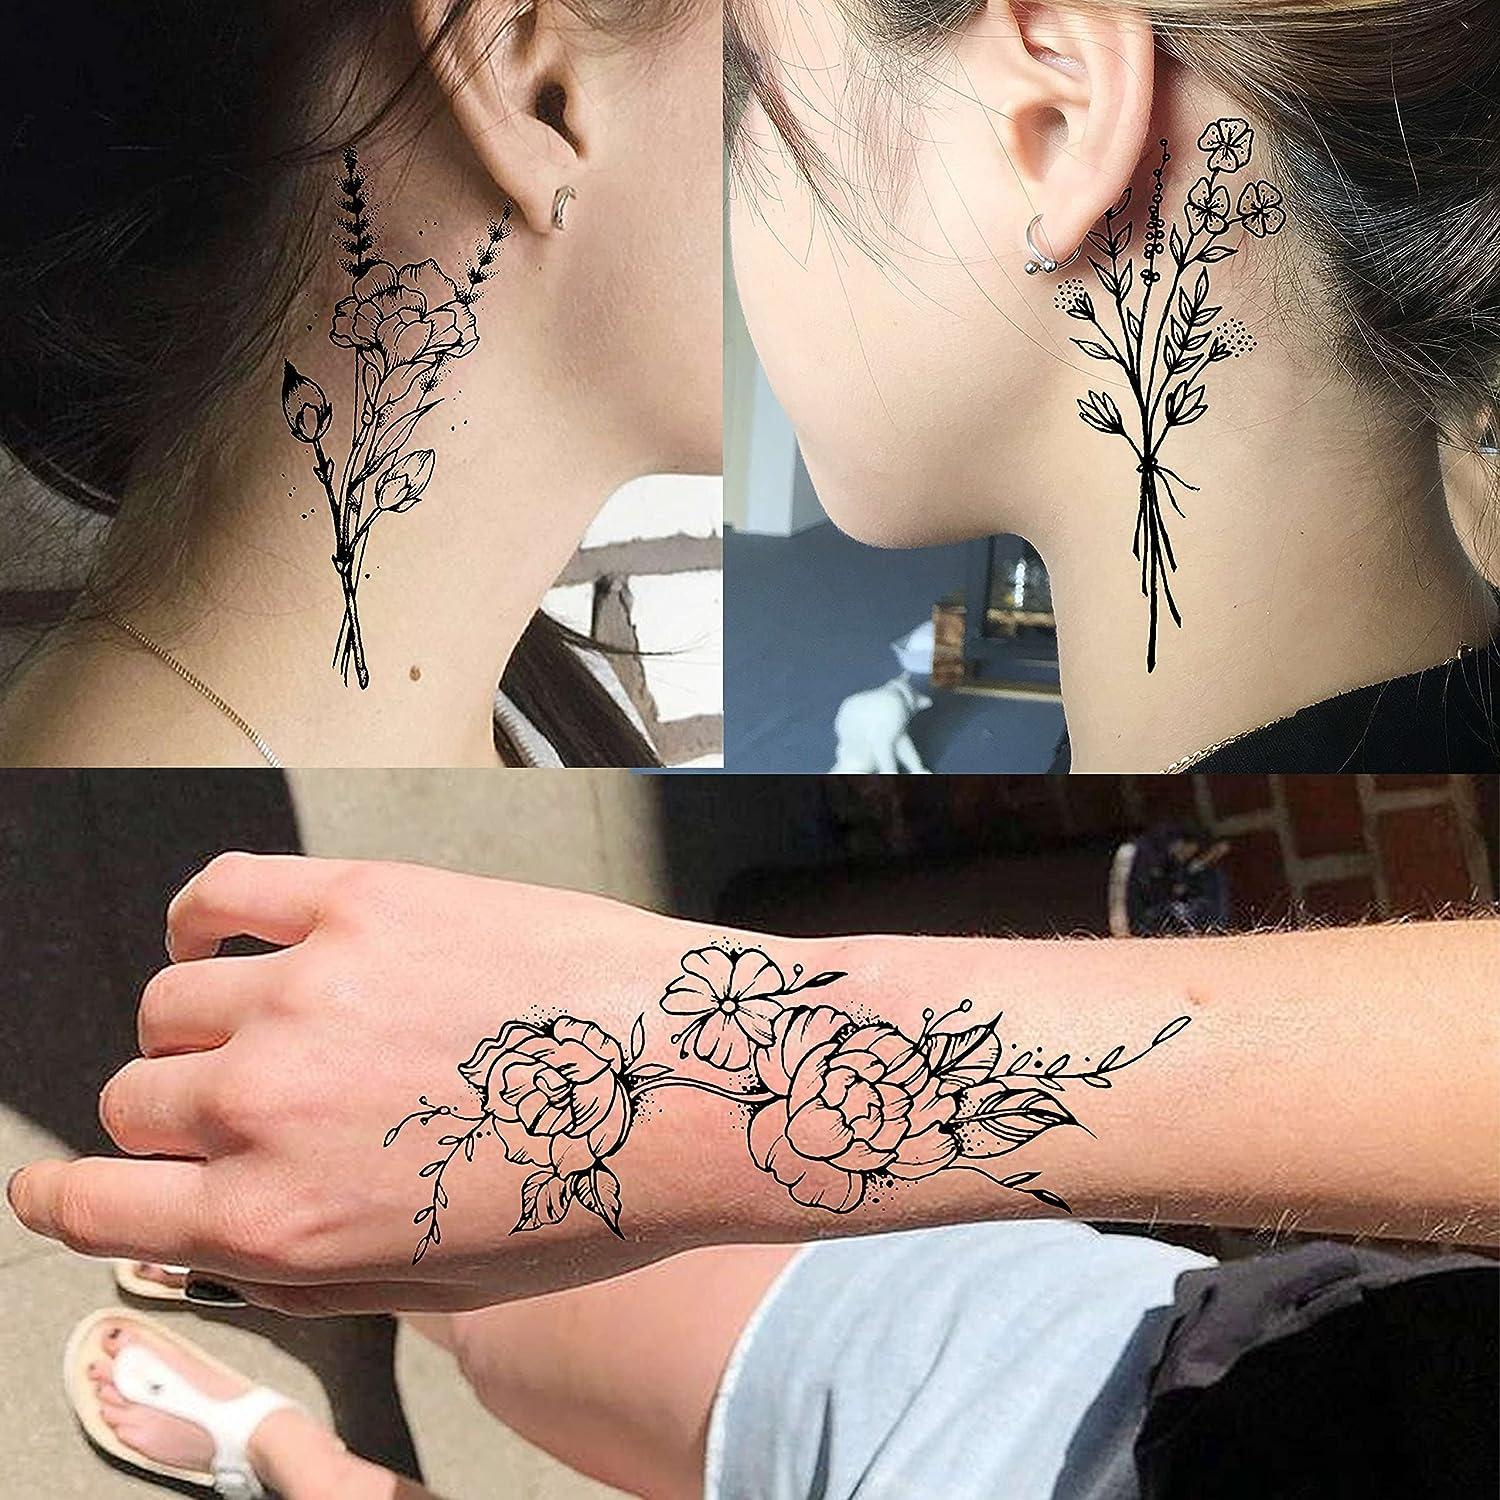 Sketch Tattoos Look Like They've Been Drawn On With A Pencil | DeMilked